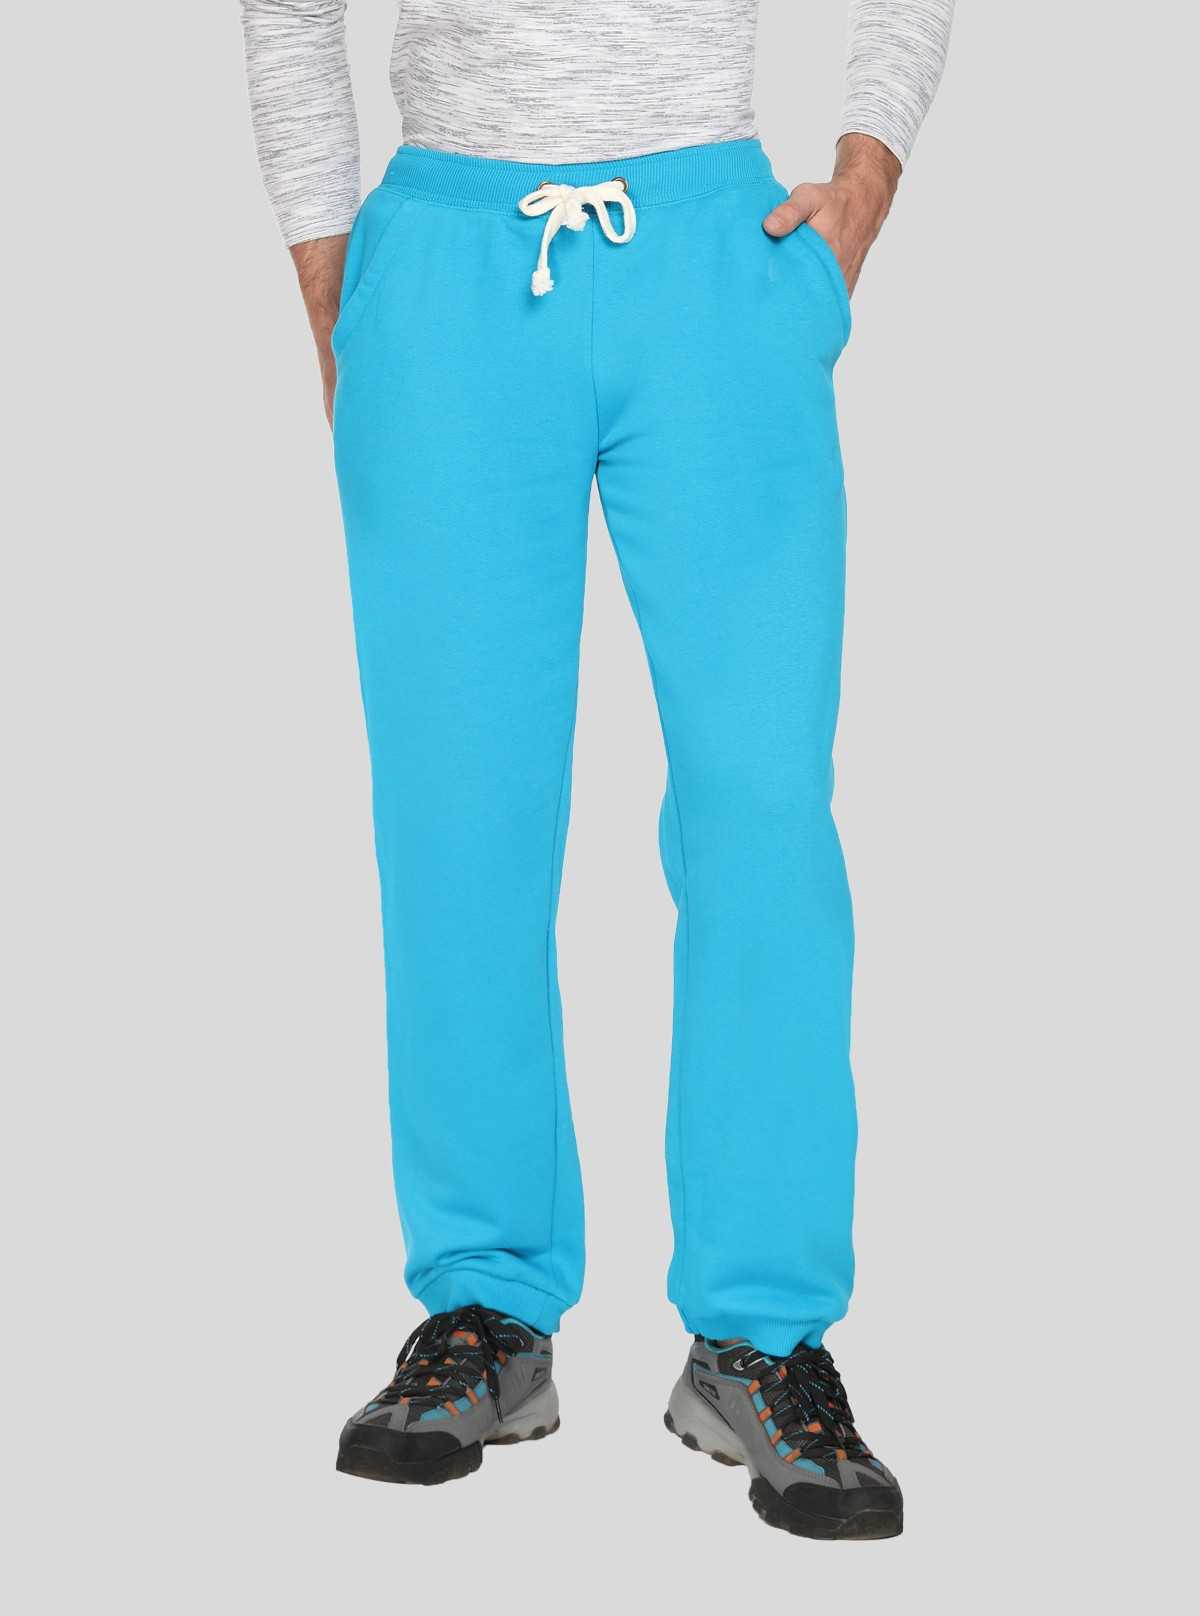 Blue Bay Cuffed Jogger Boer and Fitch - 1